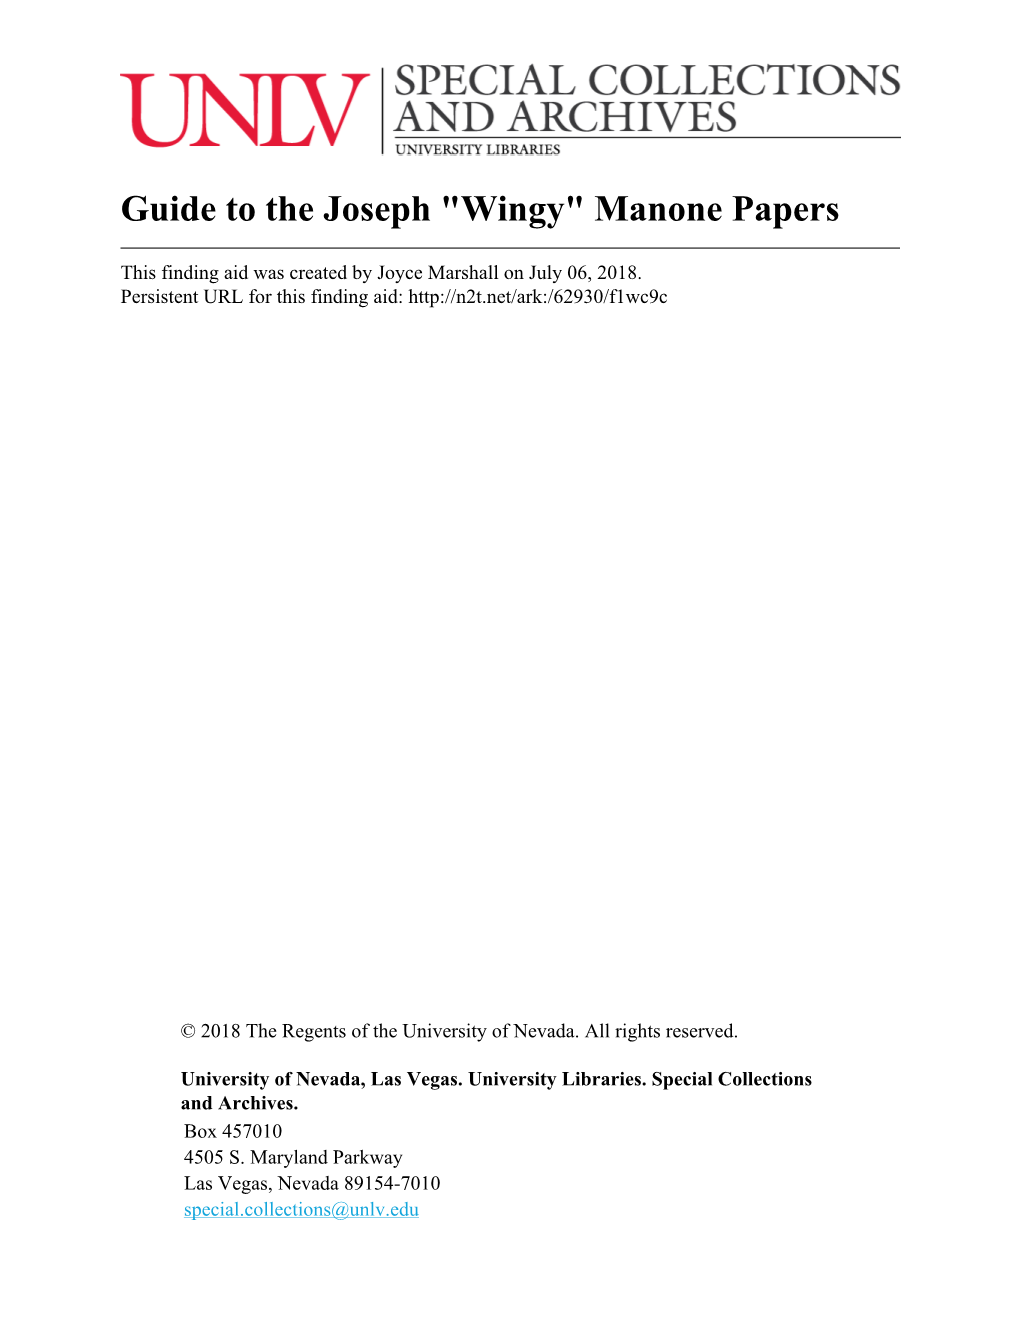 Guide to the Joseph "Wingy" Manone Papers